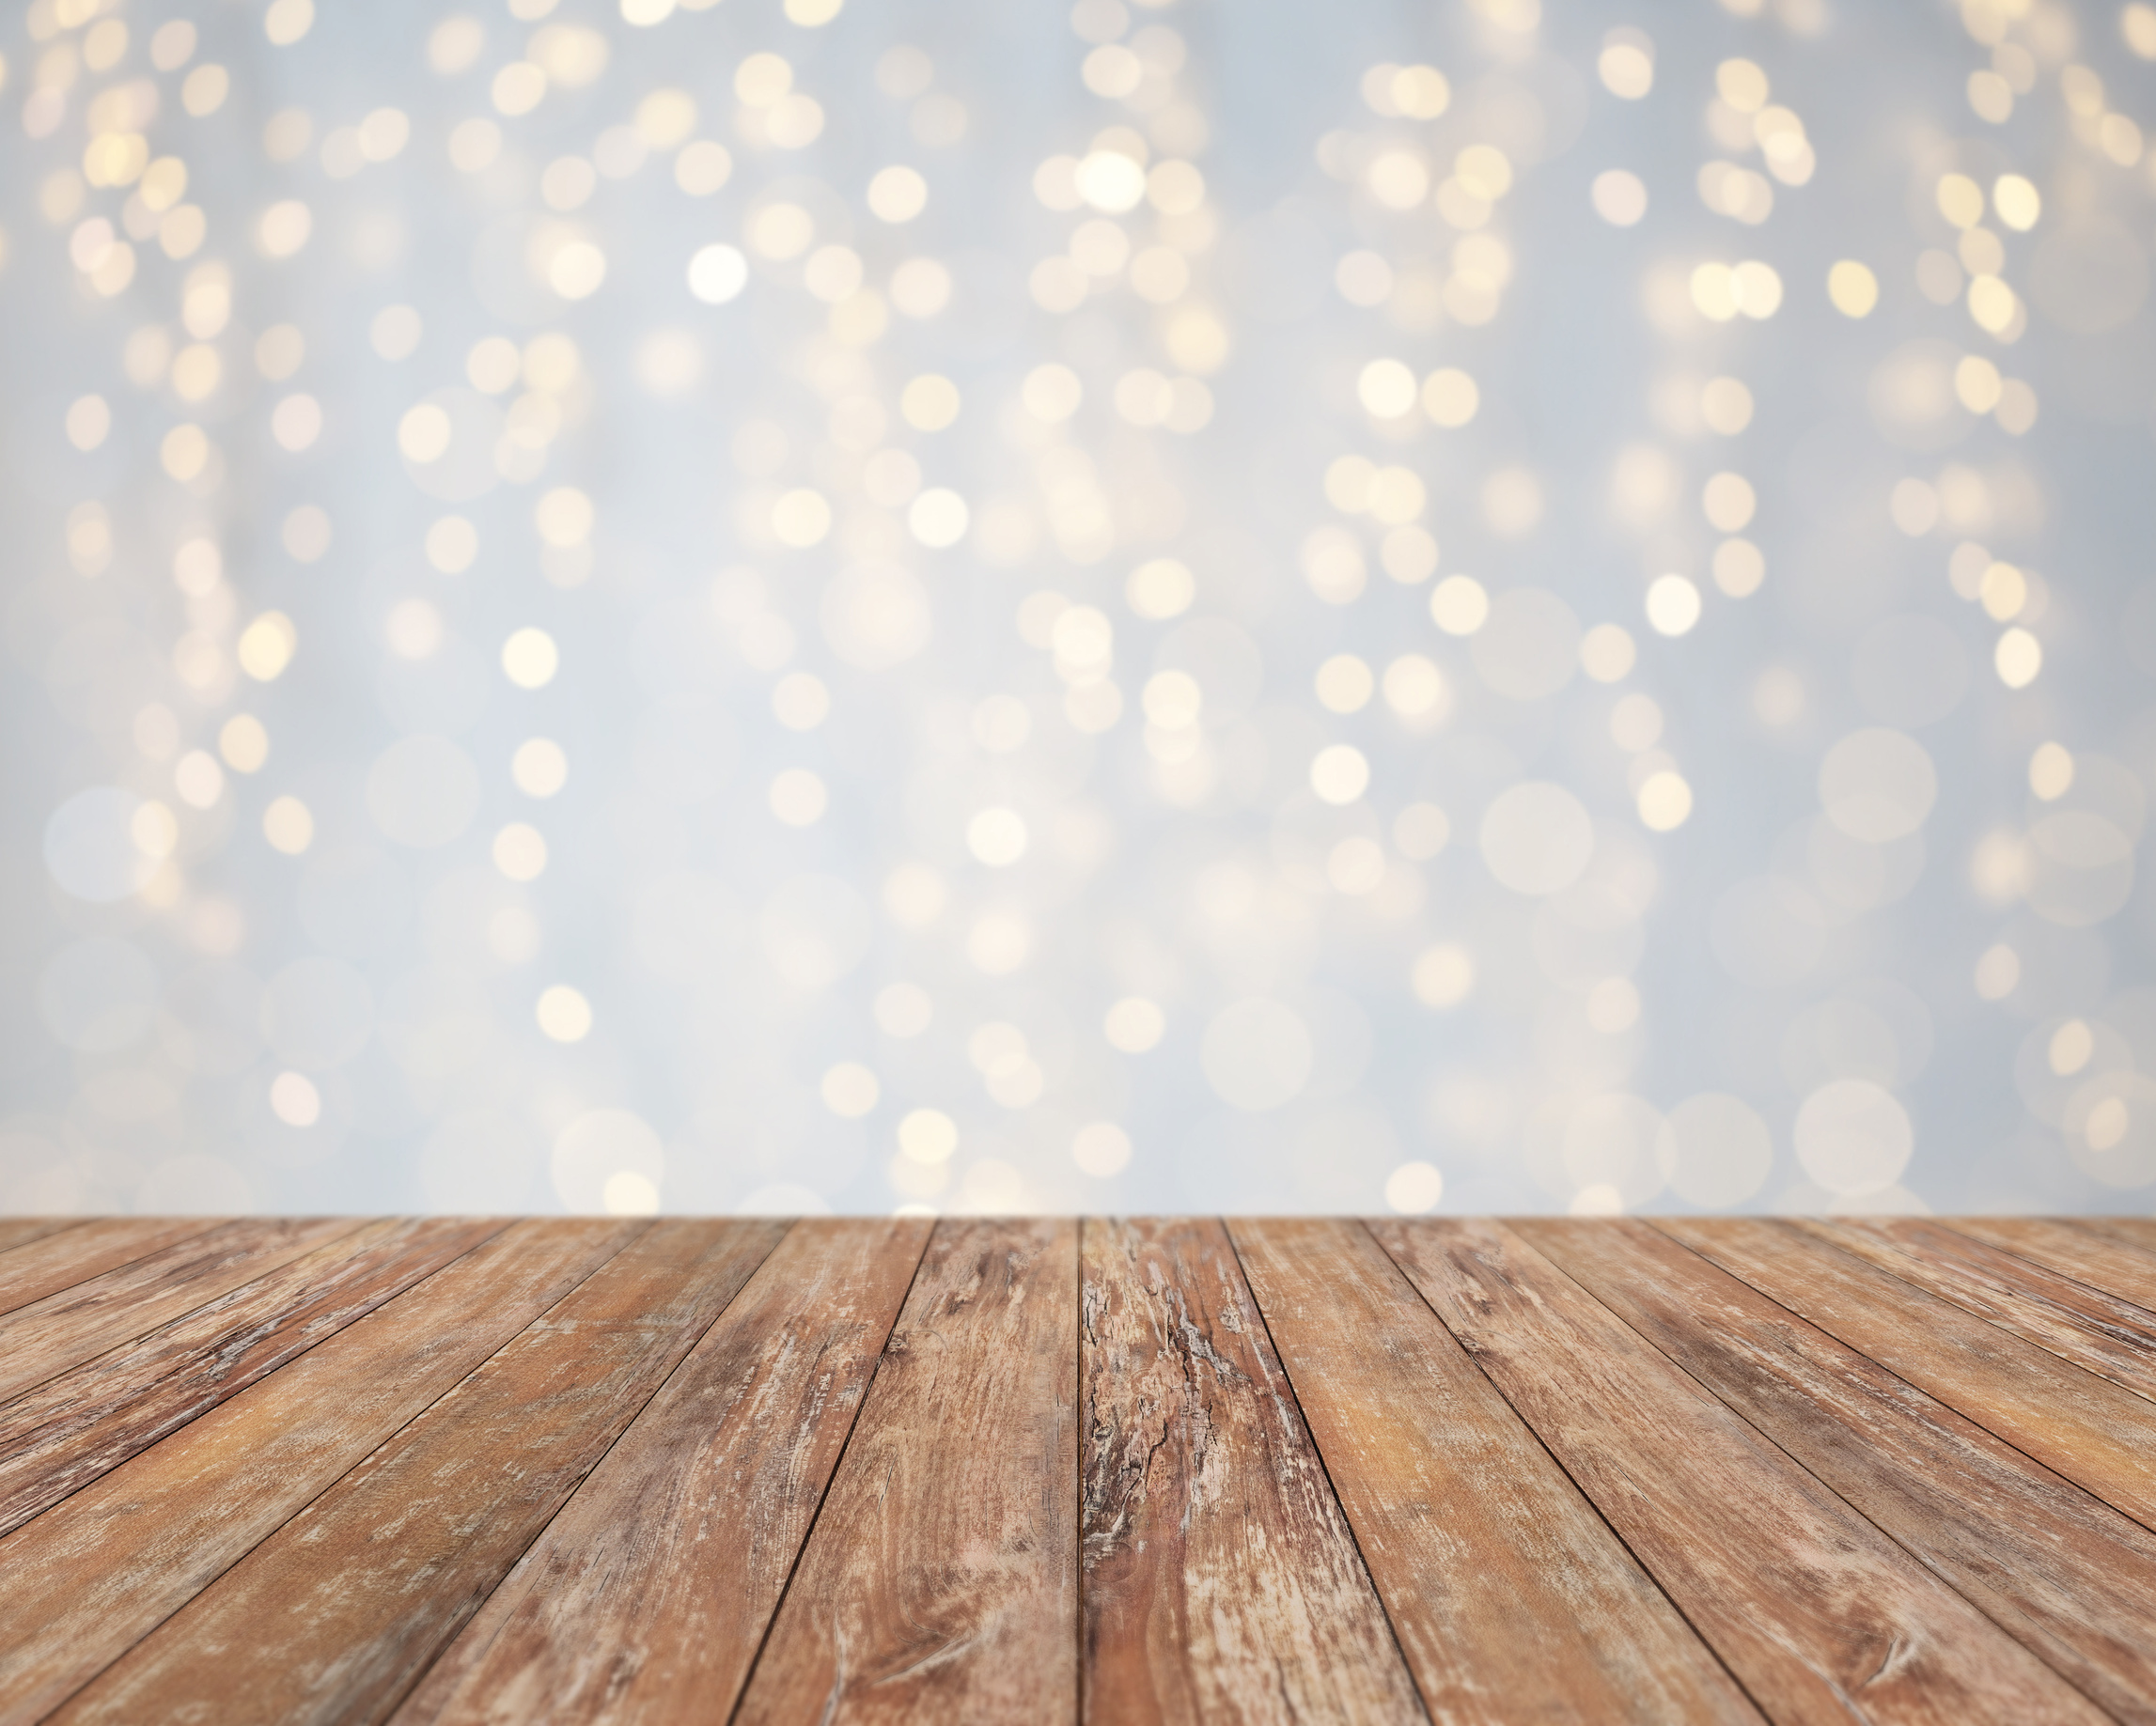 Empty Wooden Table with Christmas Golden Lights